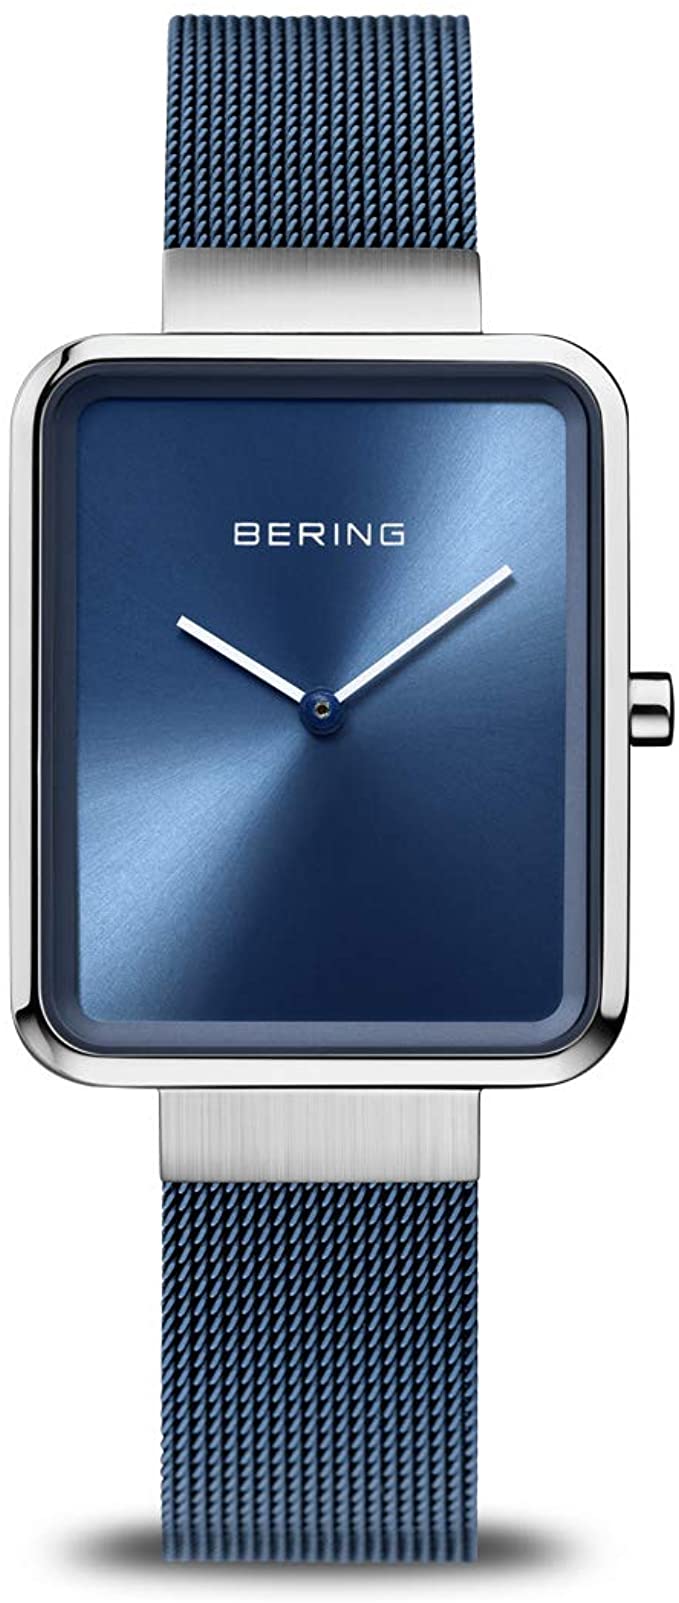 BERING Time | Women's Slim Watch 14528-307 | 28MM Case | Classic Collection | Stainless Steel Strap | Scratch-Resistant Sapphire Crystal | Minimalistic - Designed in Denmark